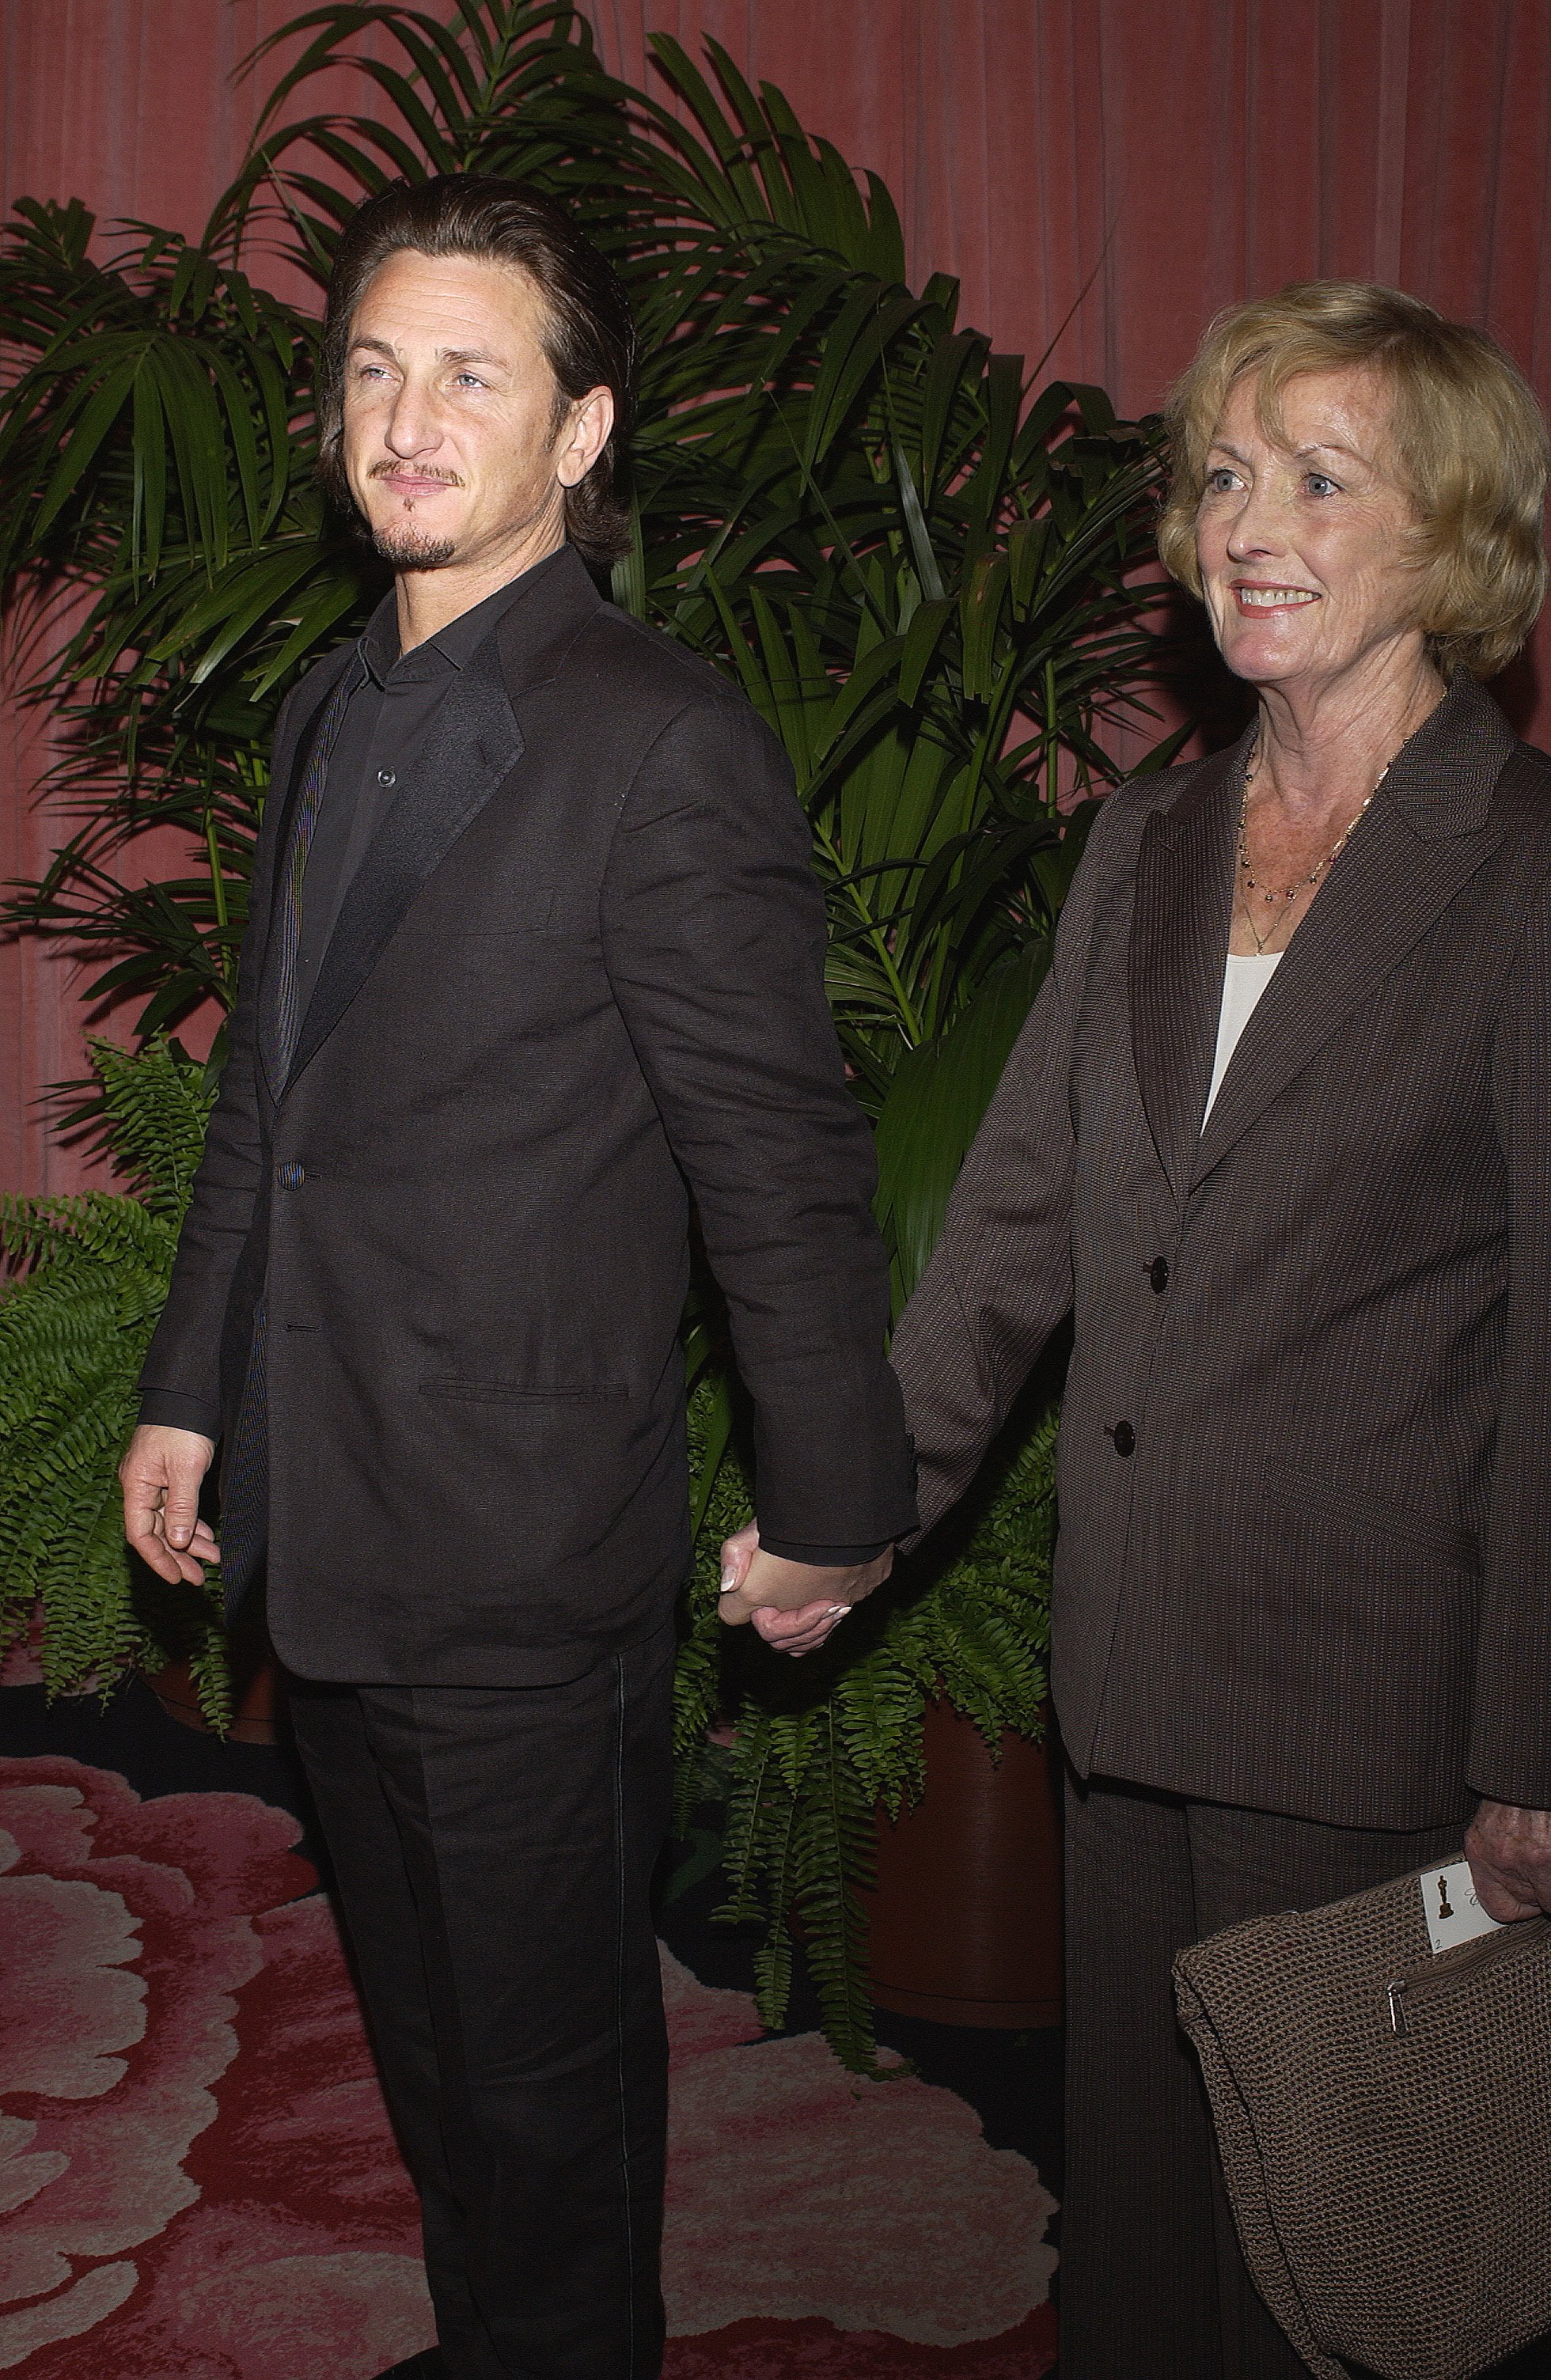  Sean Penn and his mother Eileen Ryan at the 76th Annual Oscar Nominees Luncheon | Source: Getty Images 